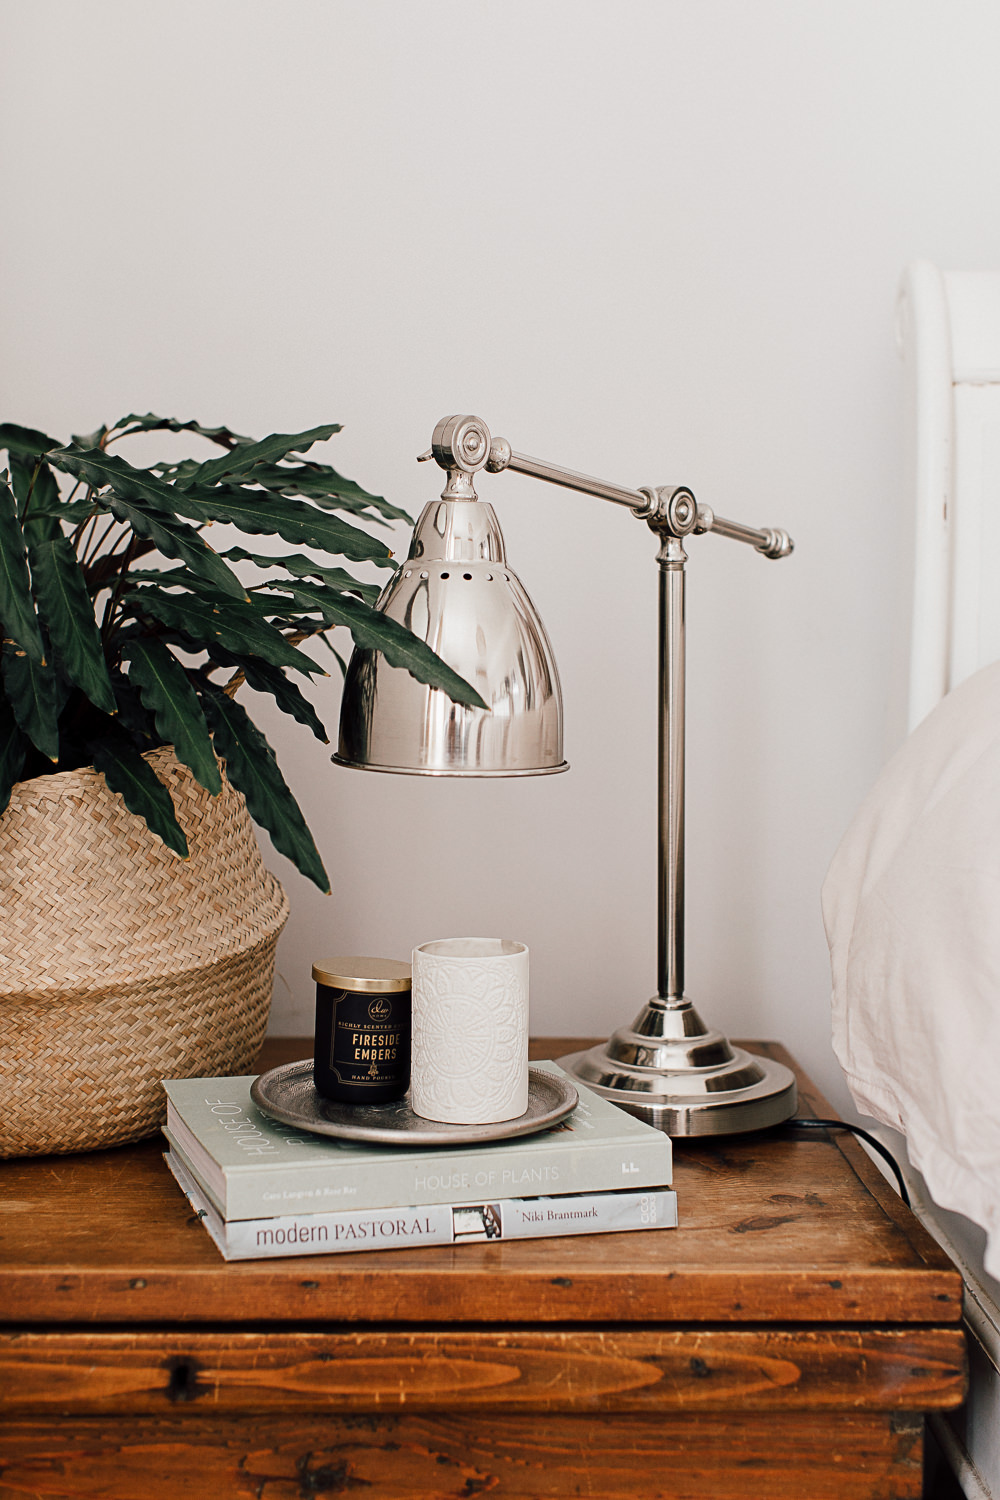 Chrome task lamp and houseplant in basket